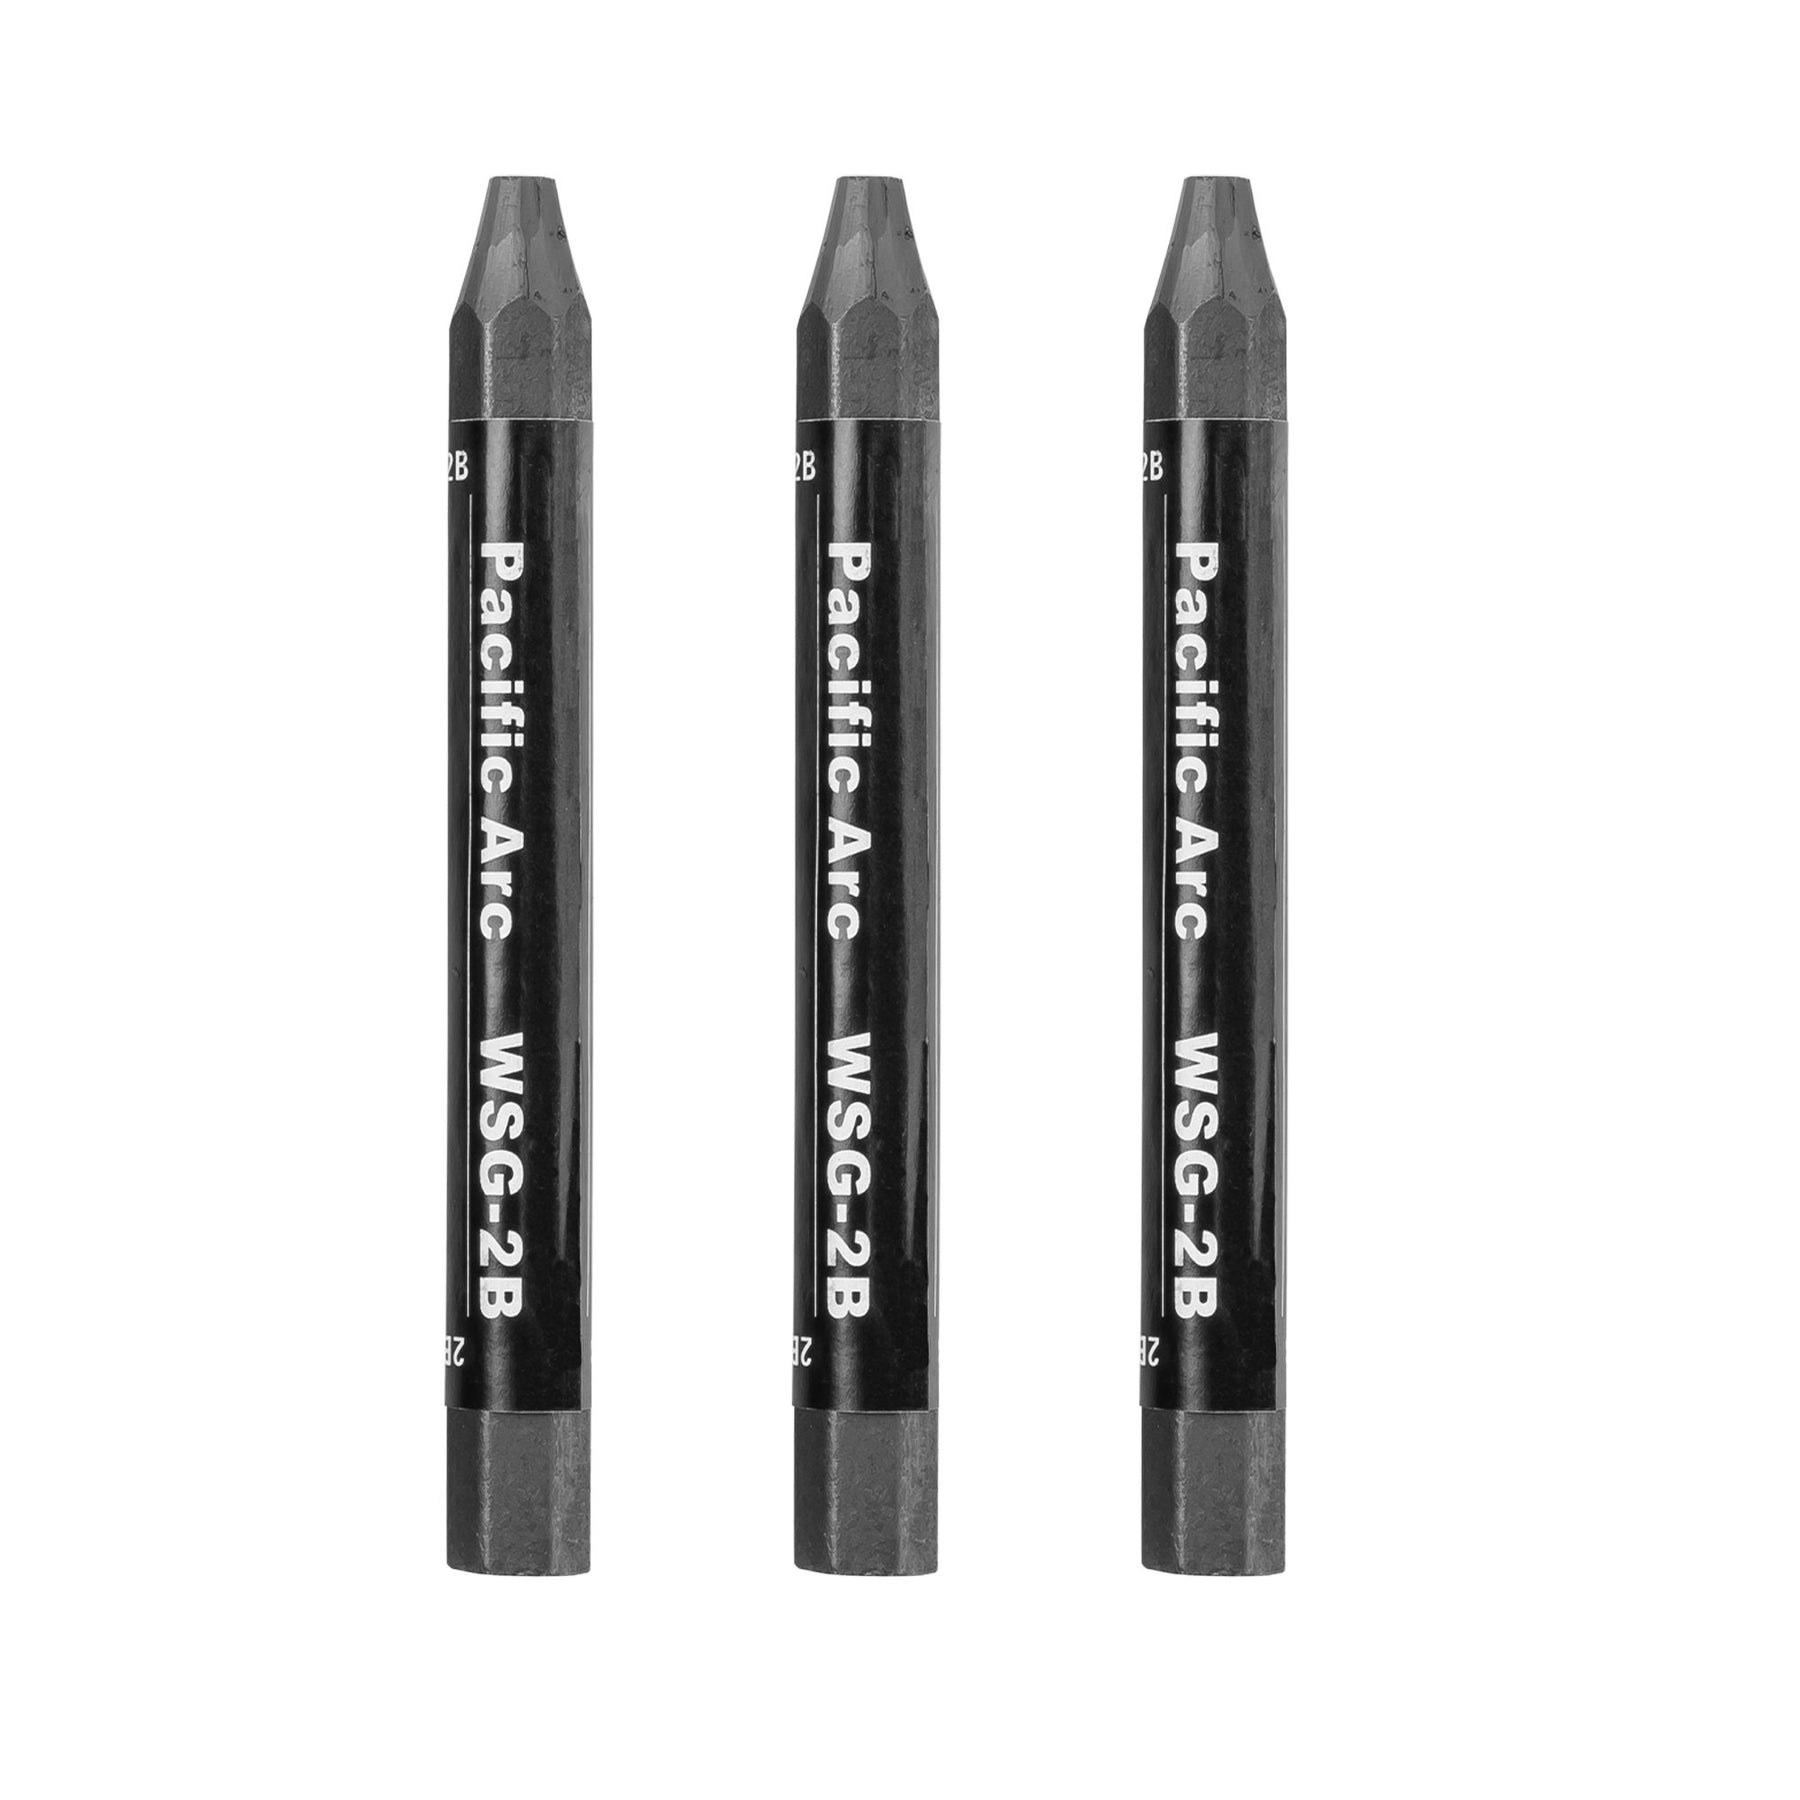 Graphite Stick Set - Water Soluble - 4B 6B 10B, Art Drawing Supplies for  Sketch & Shading Pencils